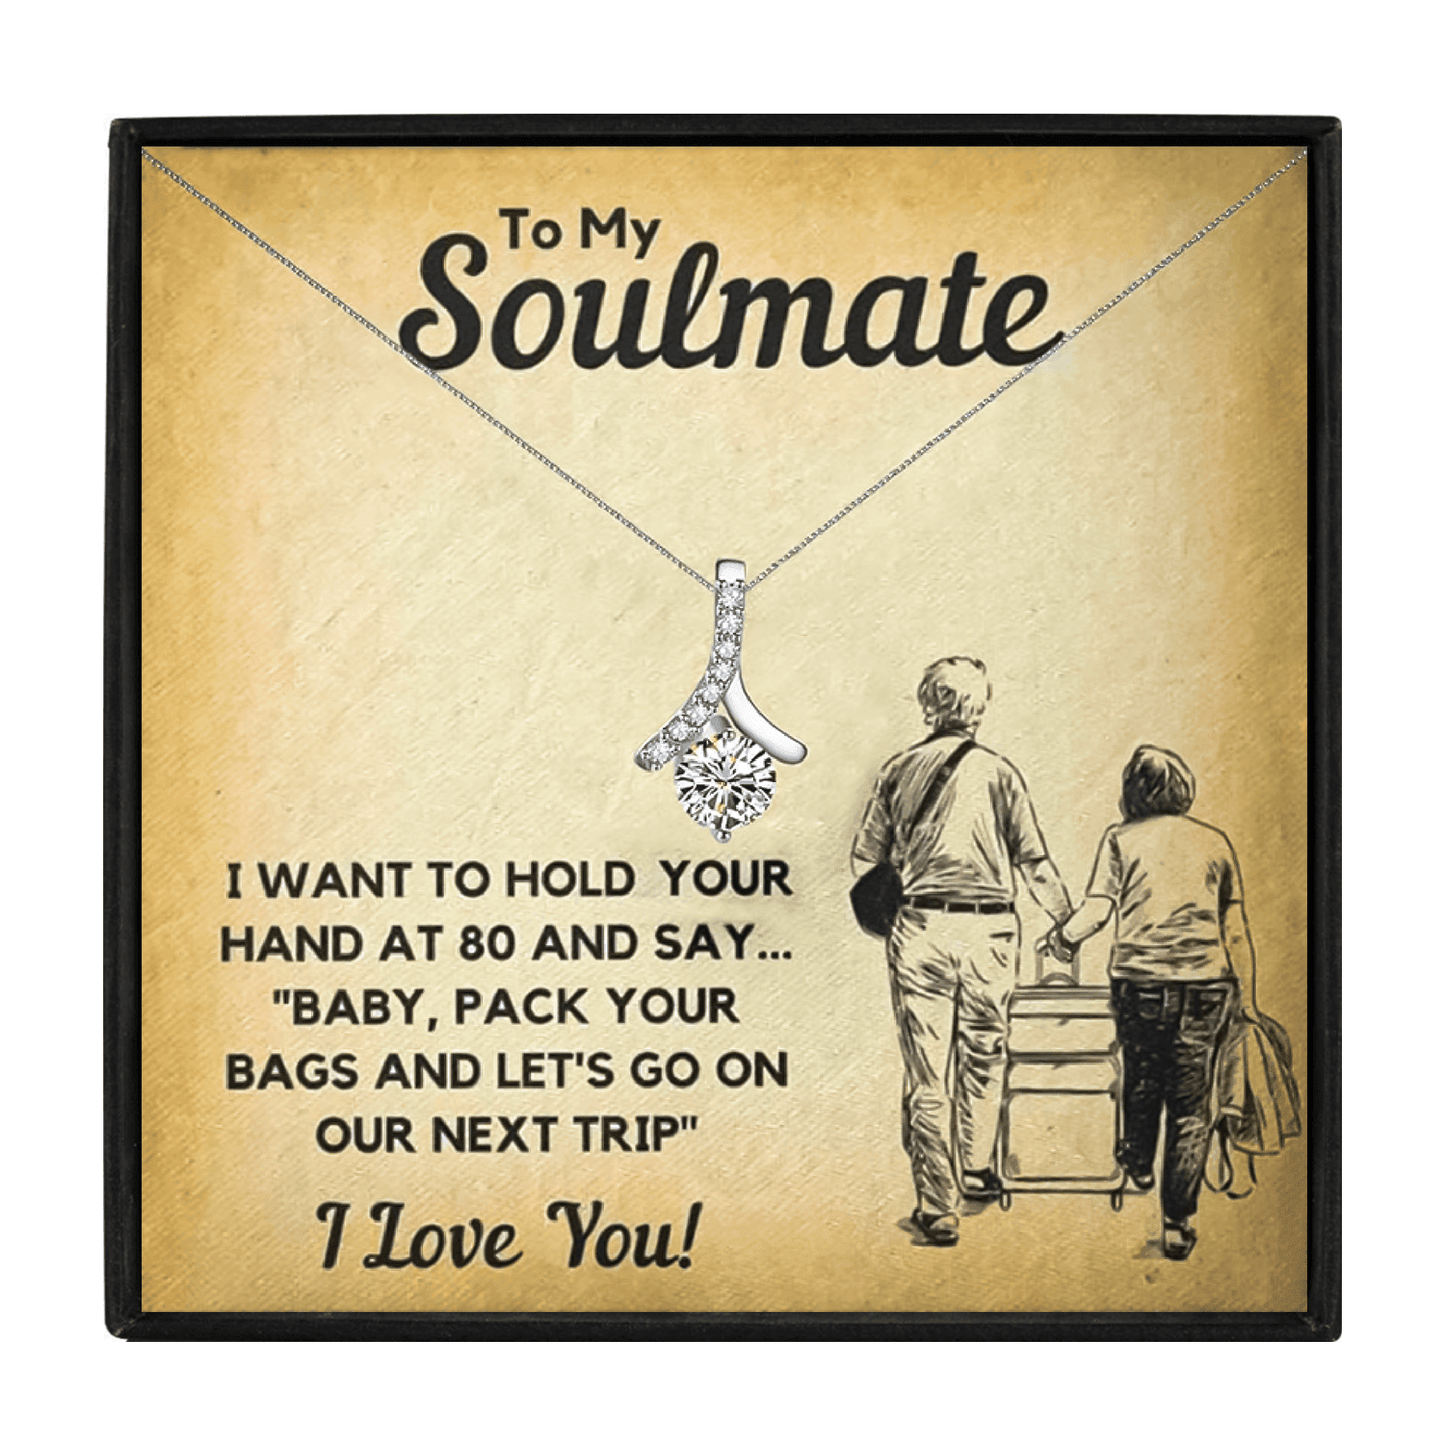 Soulmate Necklace For Her in 2023 | Soulmate Necklace For Her - undefined | my soulmate necklace, soulmate necklace, soulmate pendant, to my beautiful soulmate necklace, to my soulmate necklace | From Hunny Life | hunnylife.com